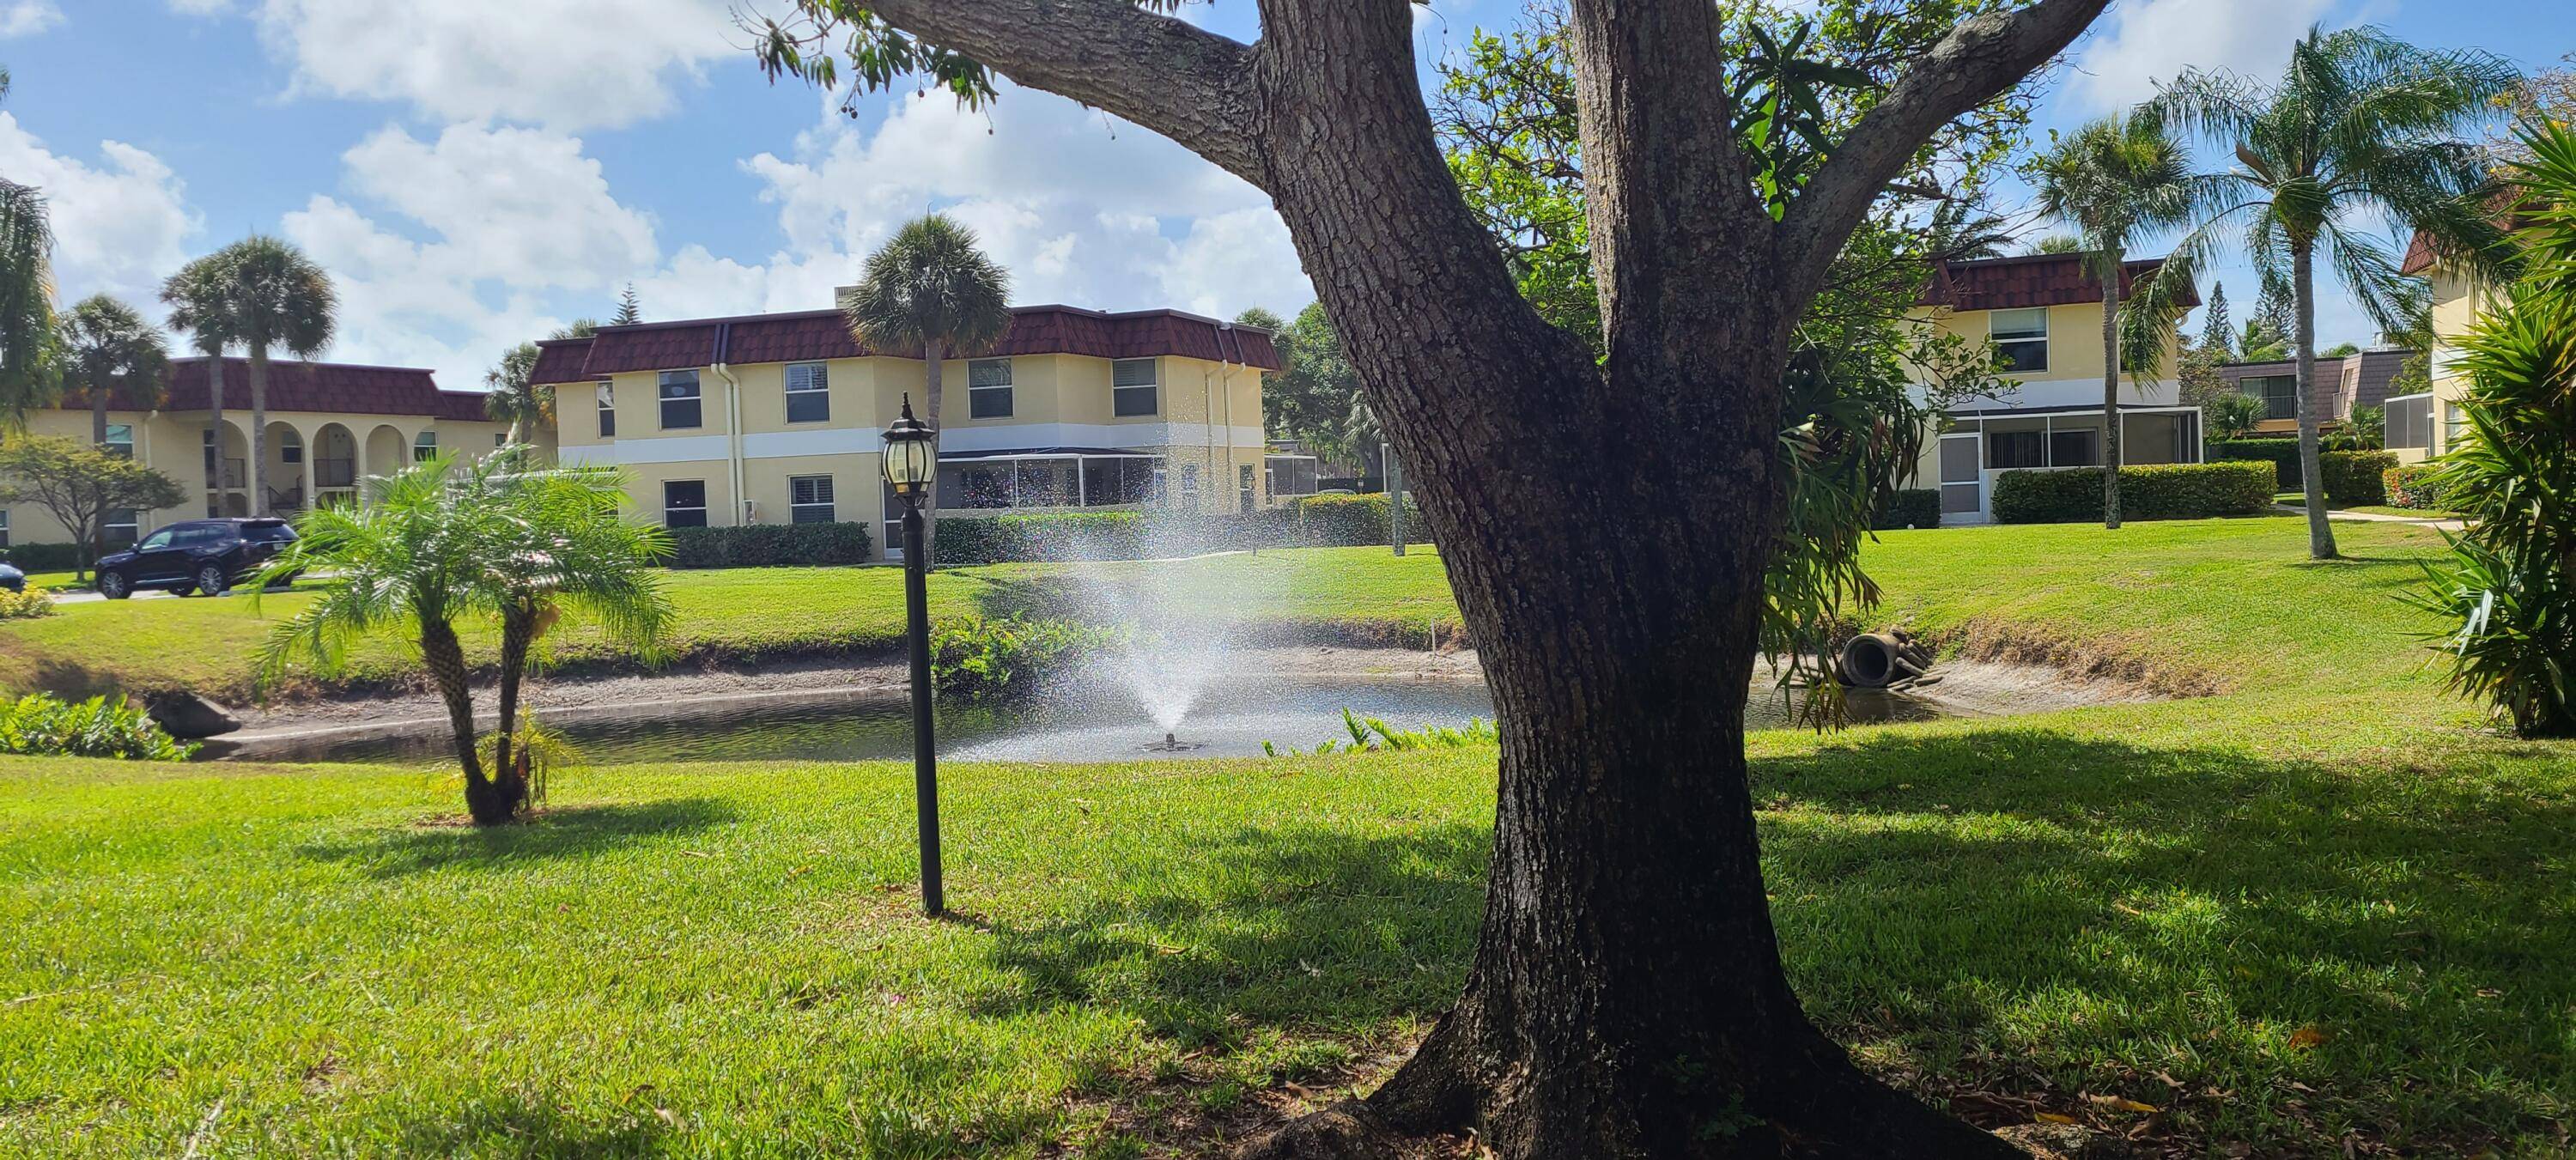 Seasonal rental. This 3 bedroom, 2 bath condo is the perfect location to enjoy all that Jupiter has to offer.